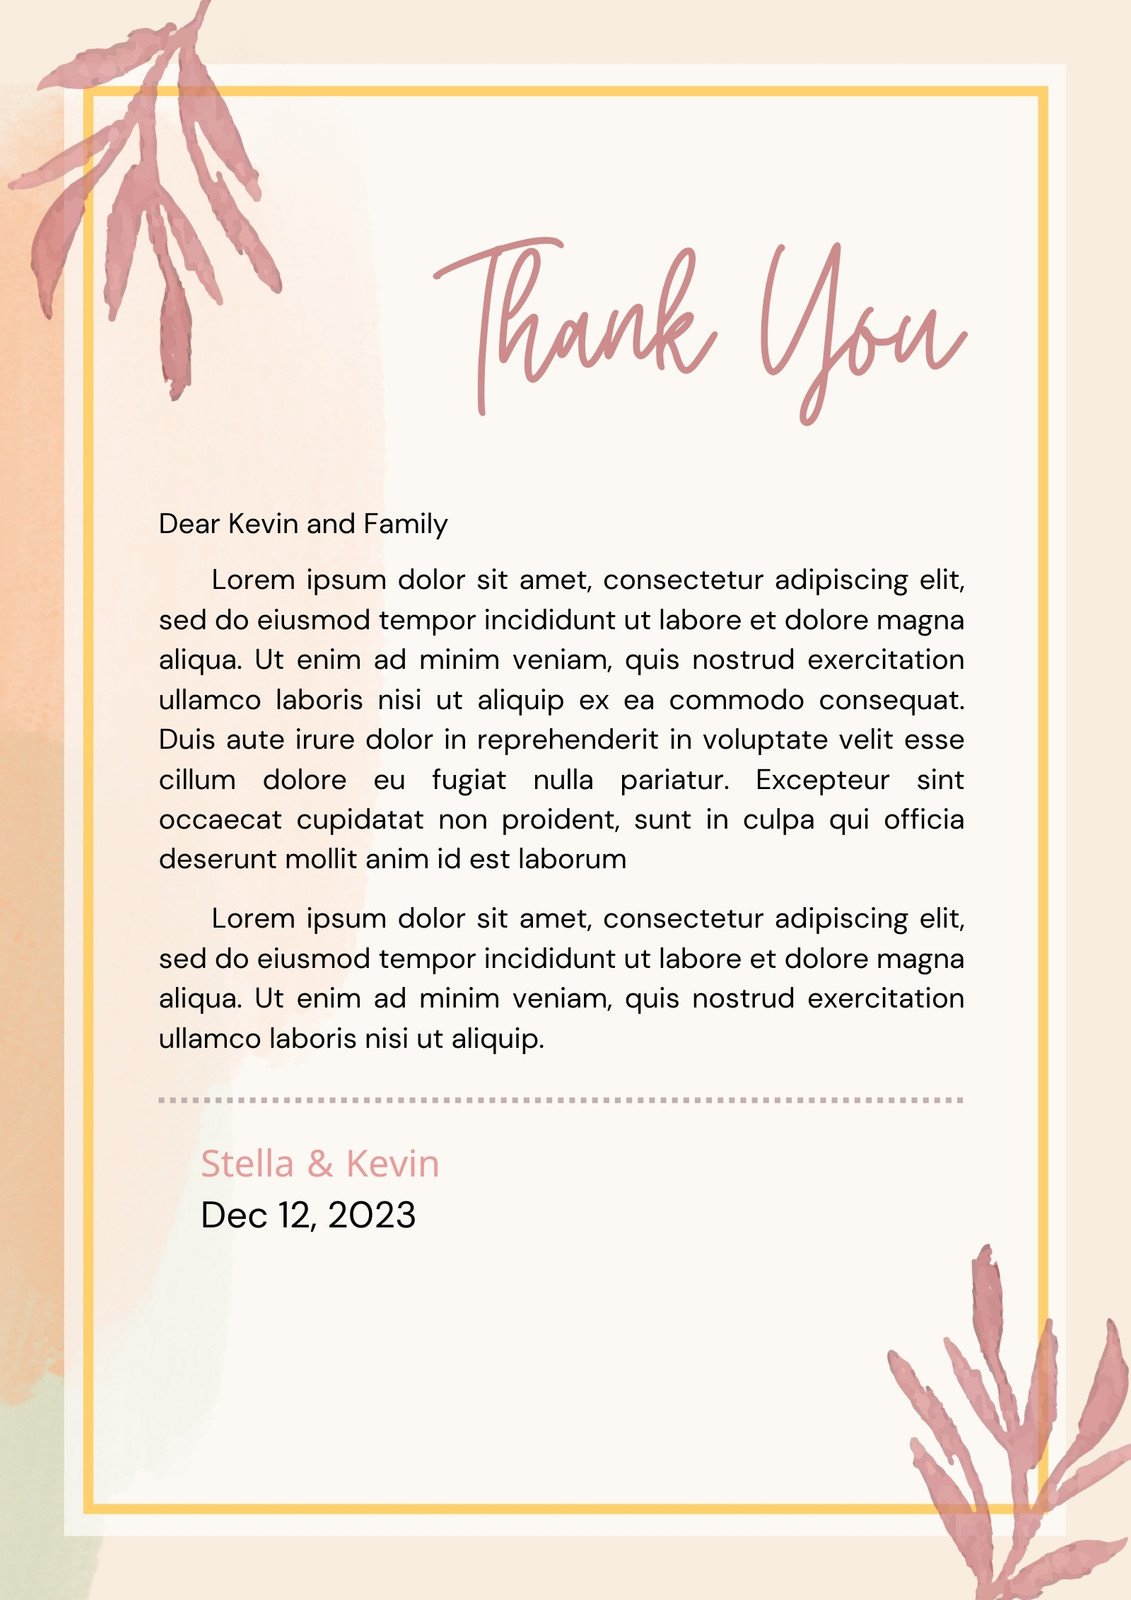 business-formal-thank-you-letter-samples